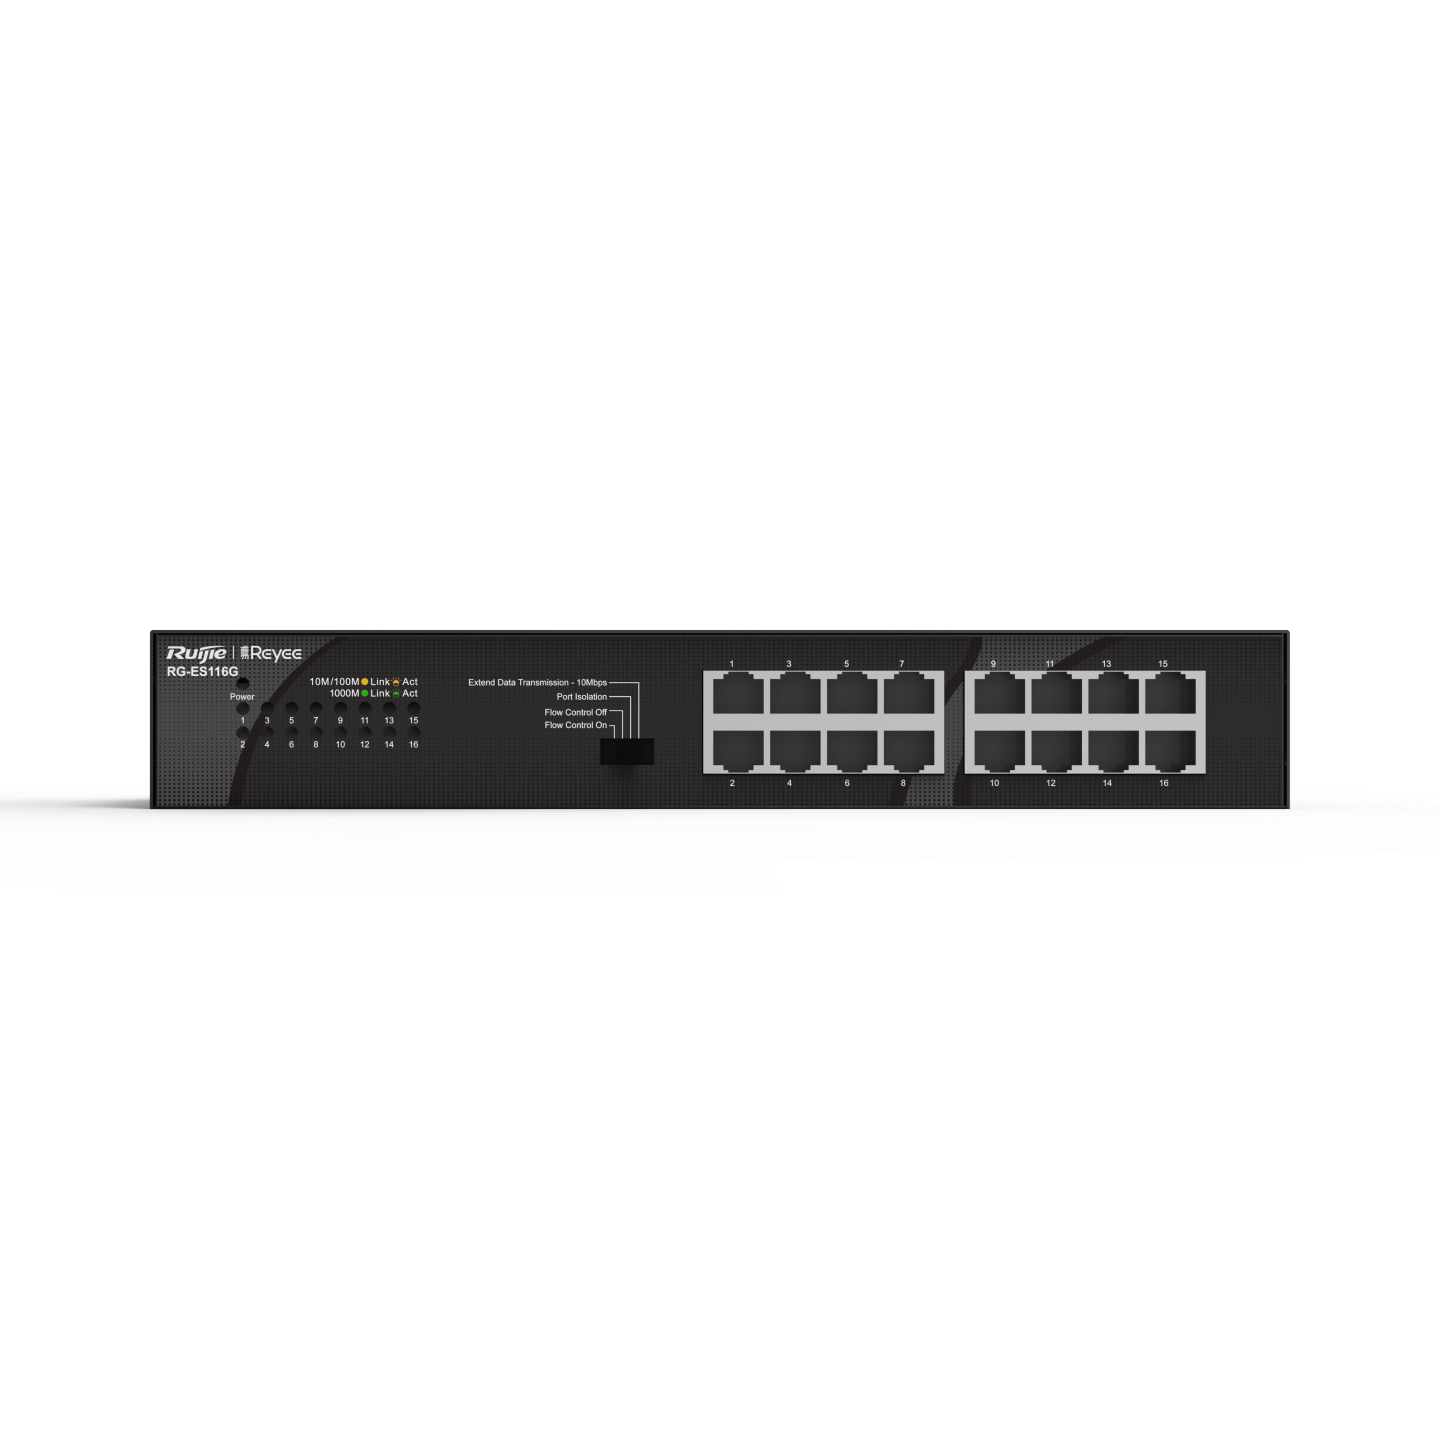 RG-ES116G, 16-port 10/100/1000Mbps Unmanaged Non-PoE Switch